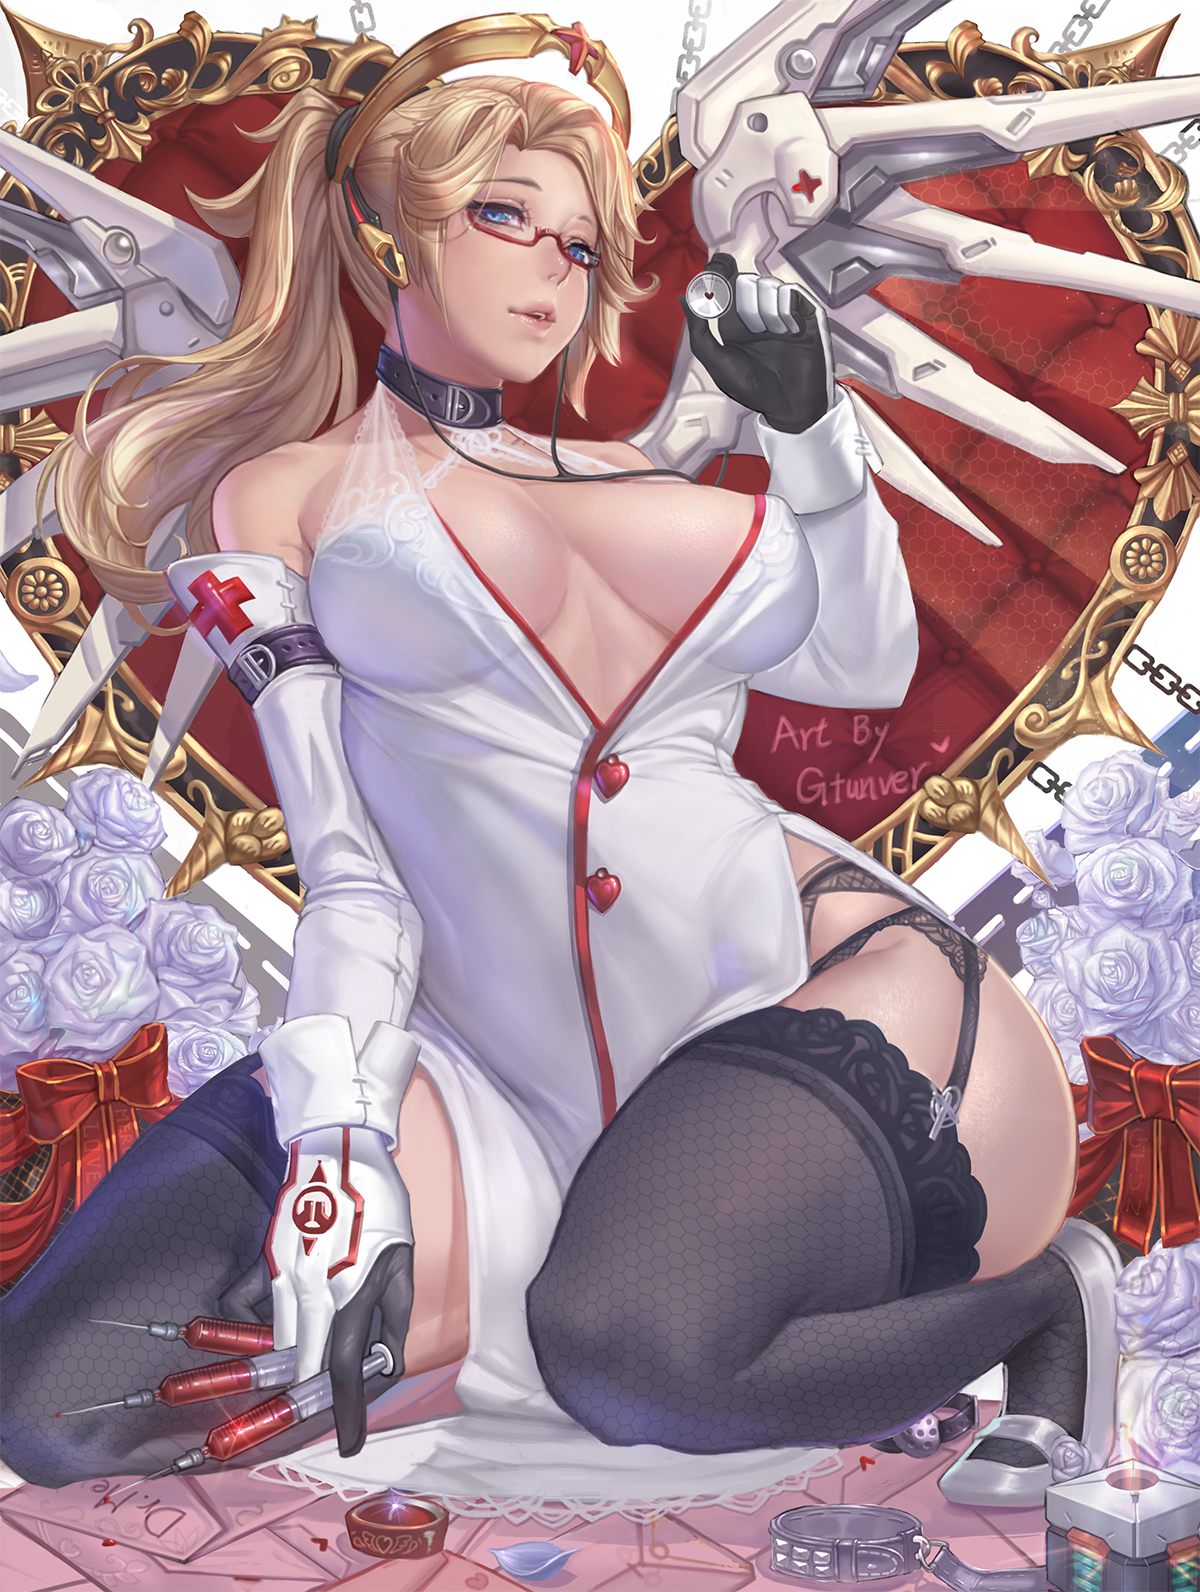 Anime 1200x1592 anime anime girls gtunver portrait display Overwatch Mercy (Overwatch) glasses blonde big boobs thigh-highs black thigh-highs cleavage